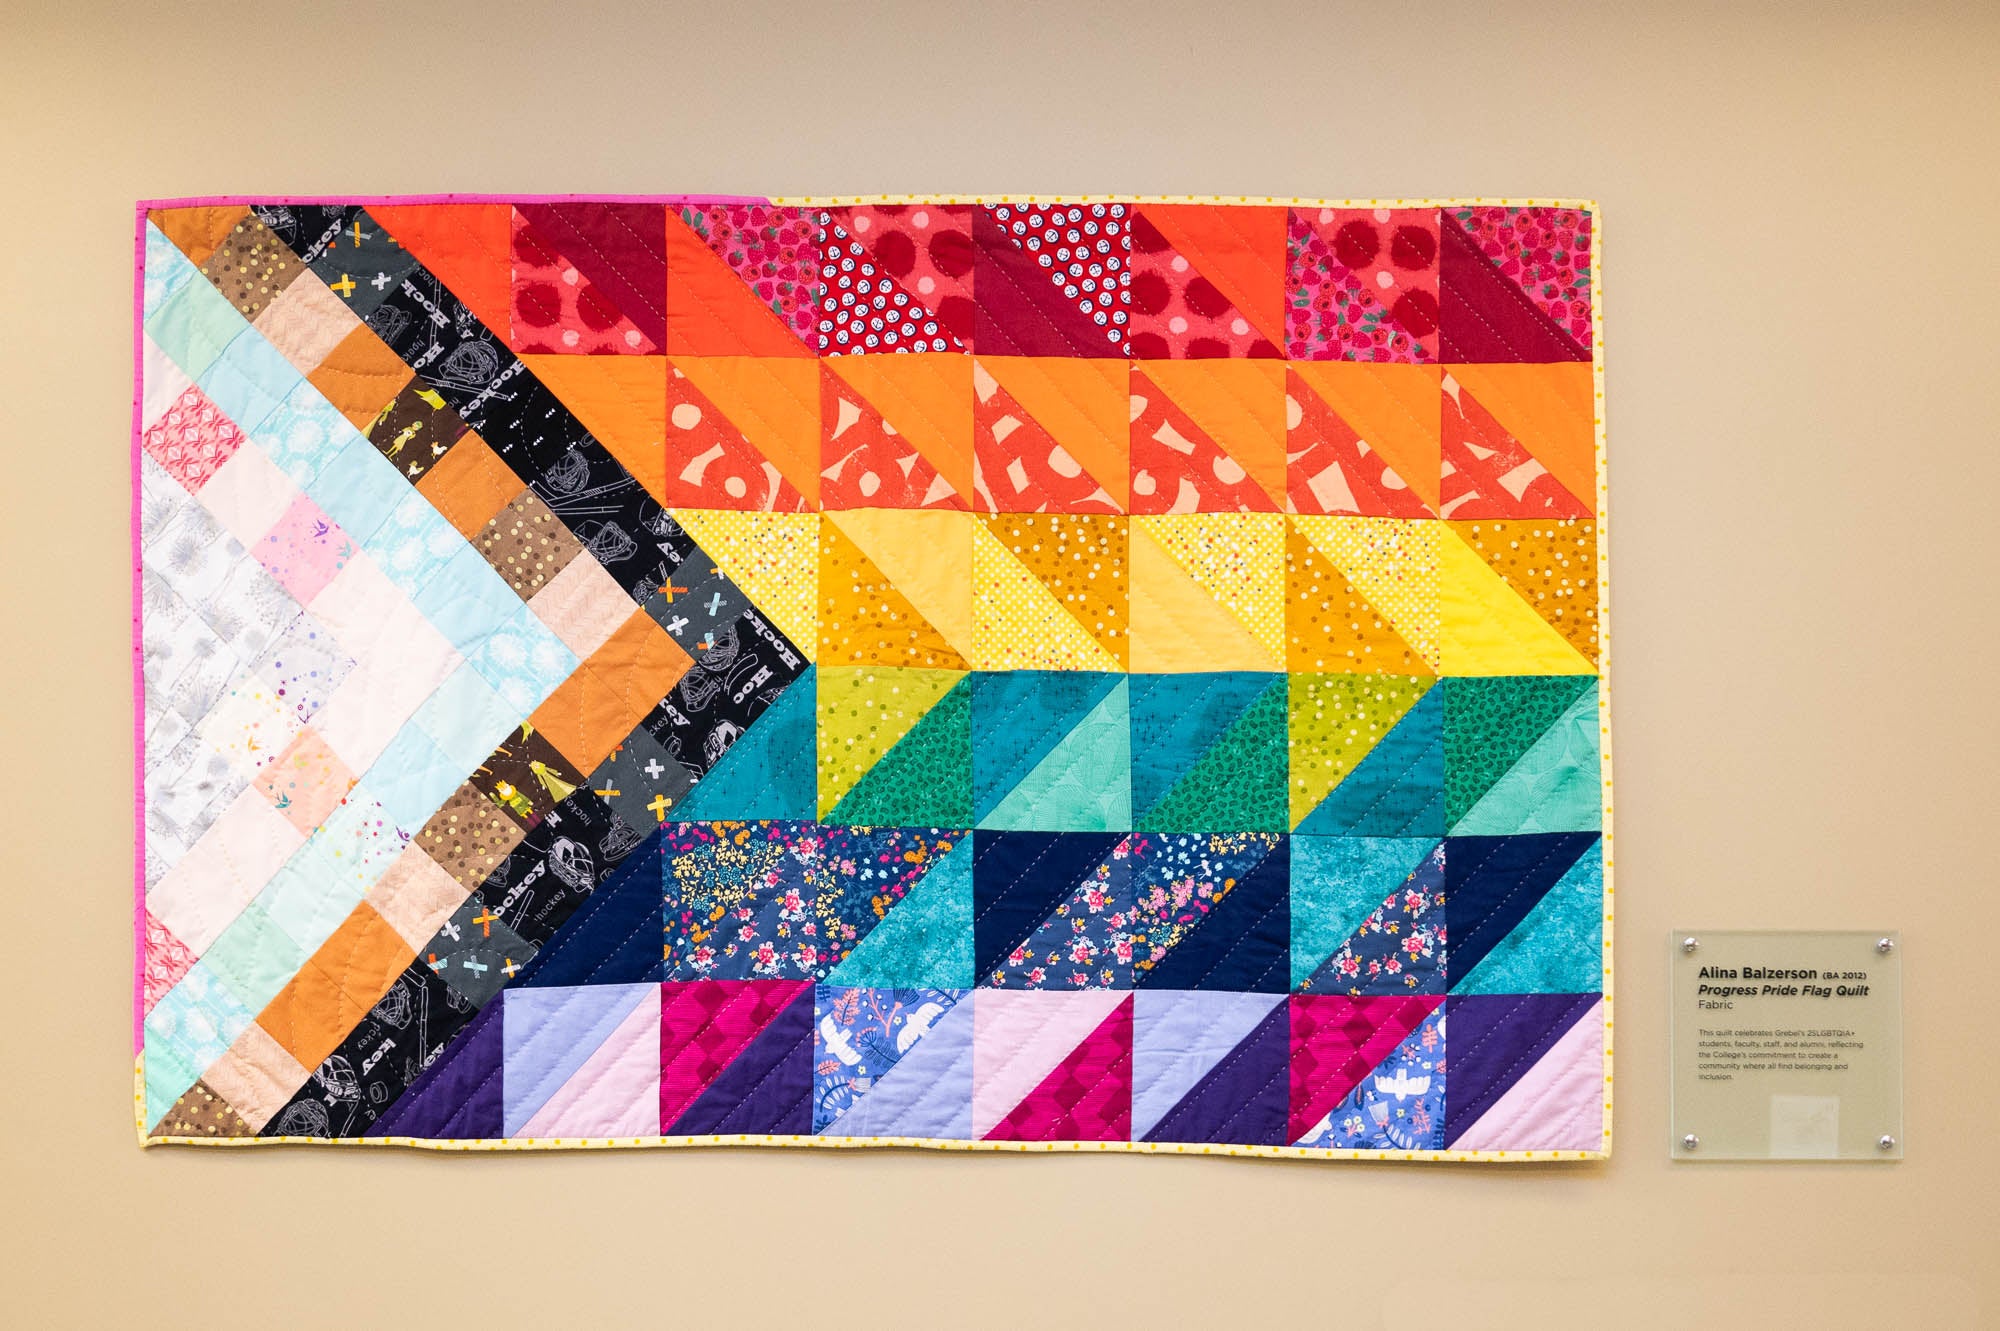 A photograph of a quilt hanging on a wall. The quilted, colourful fabric is made up of triangle shapes to remsemble the pattern of the progress pride flag.